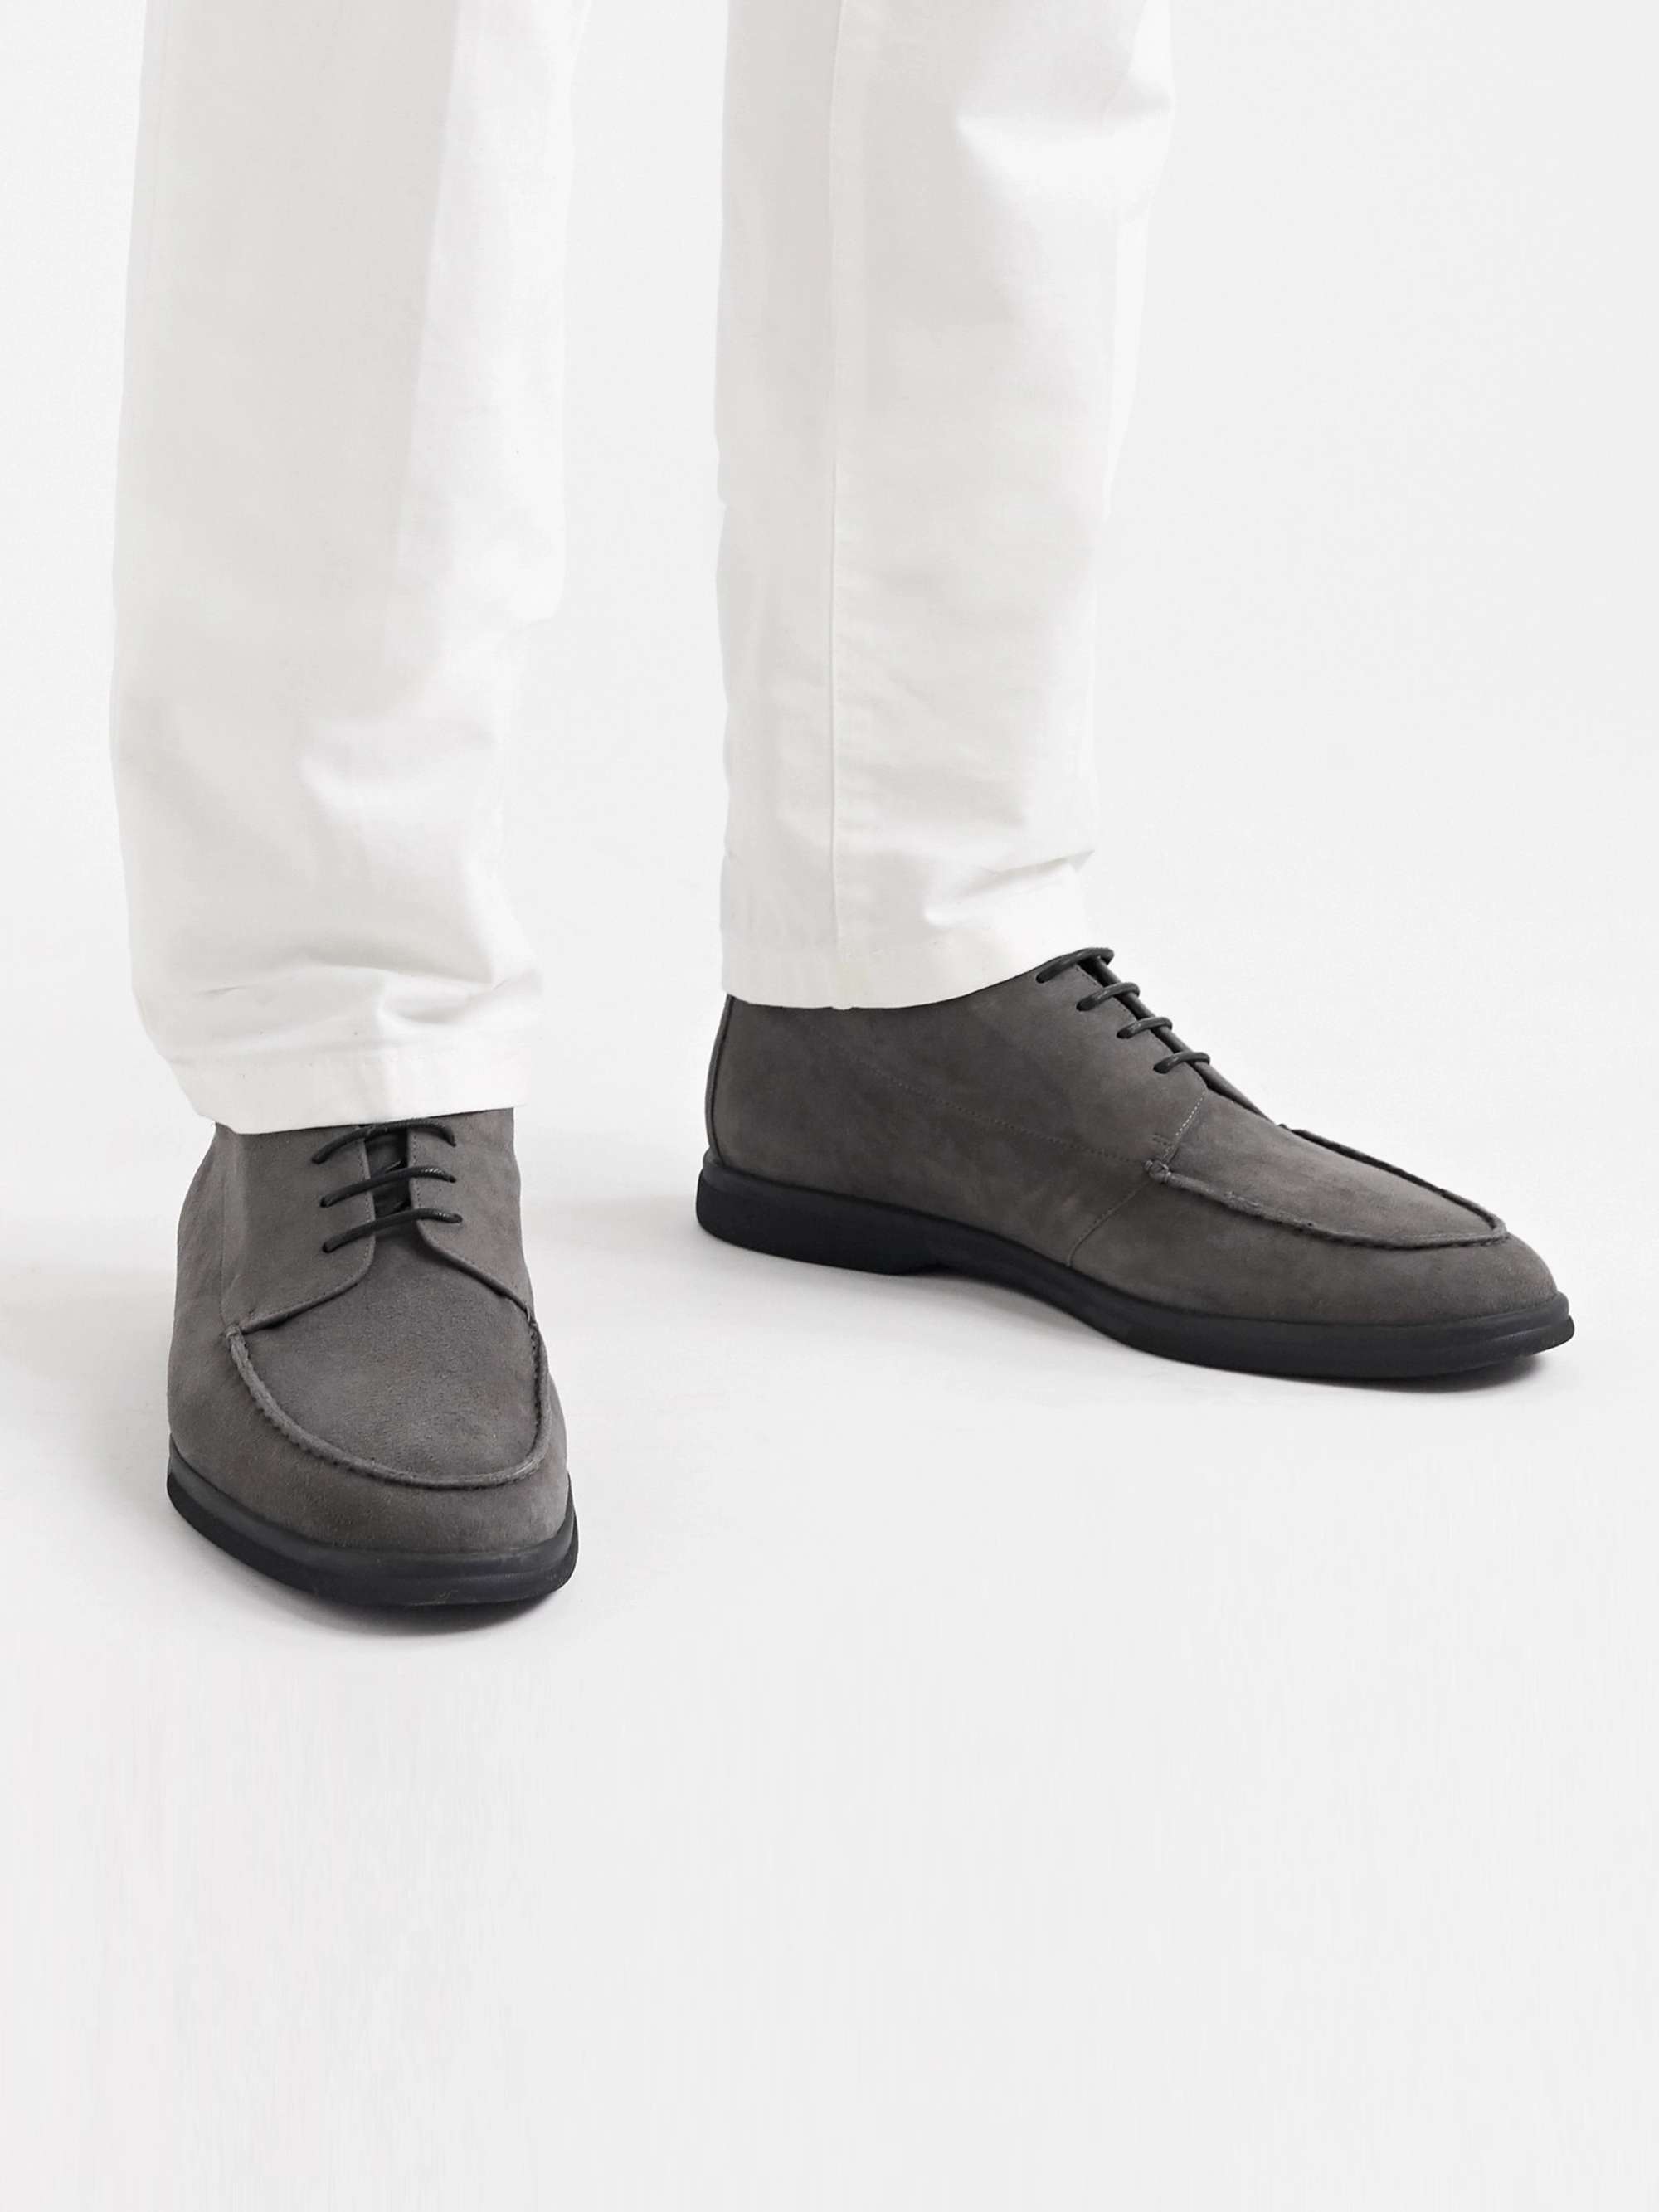 CANALI Suede Desert Boots